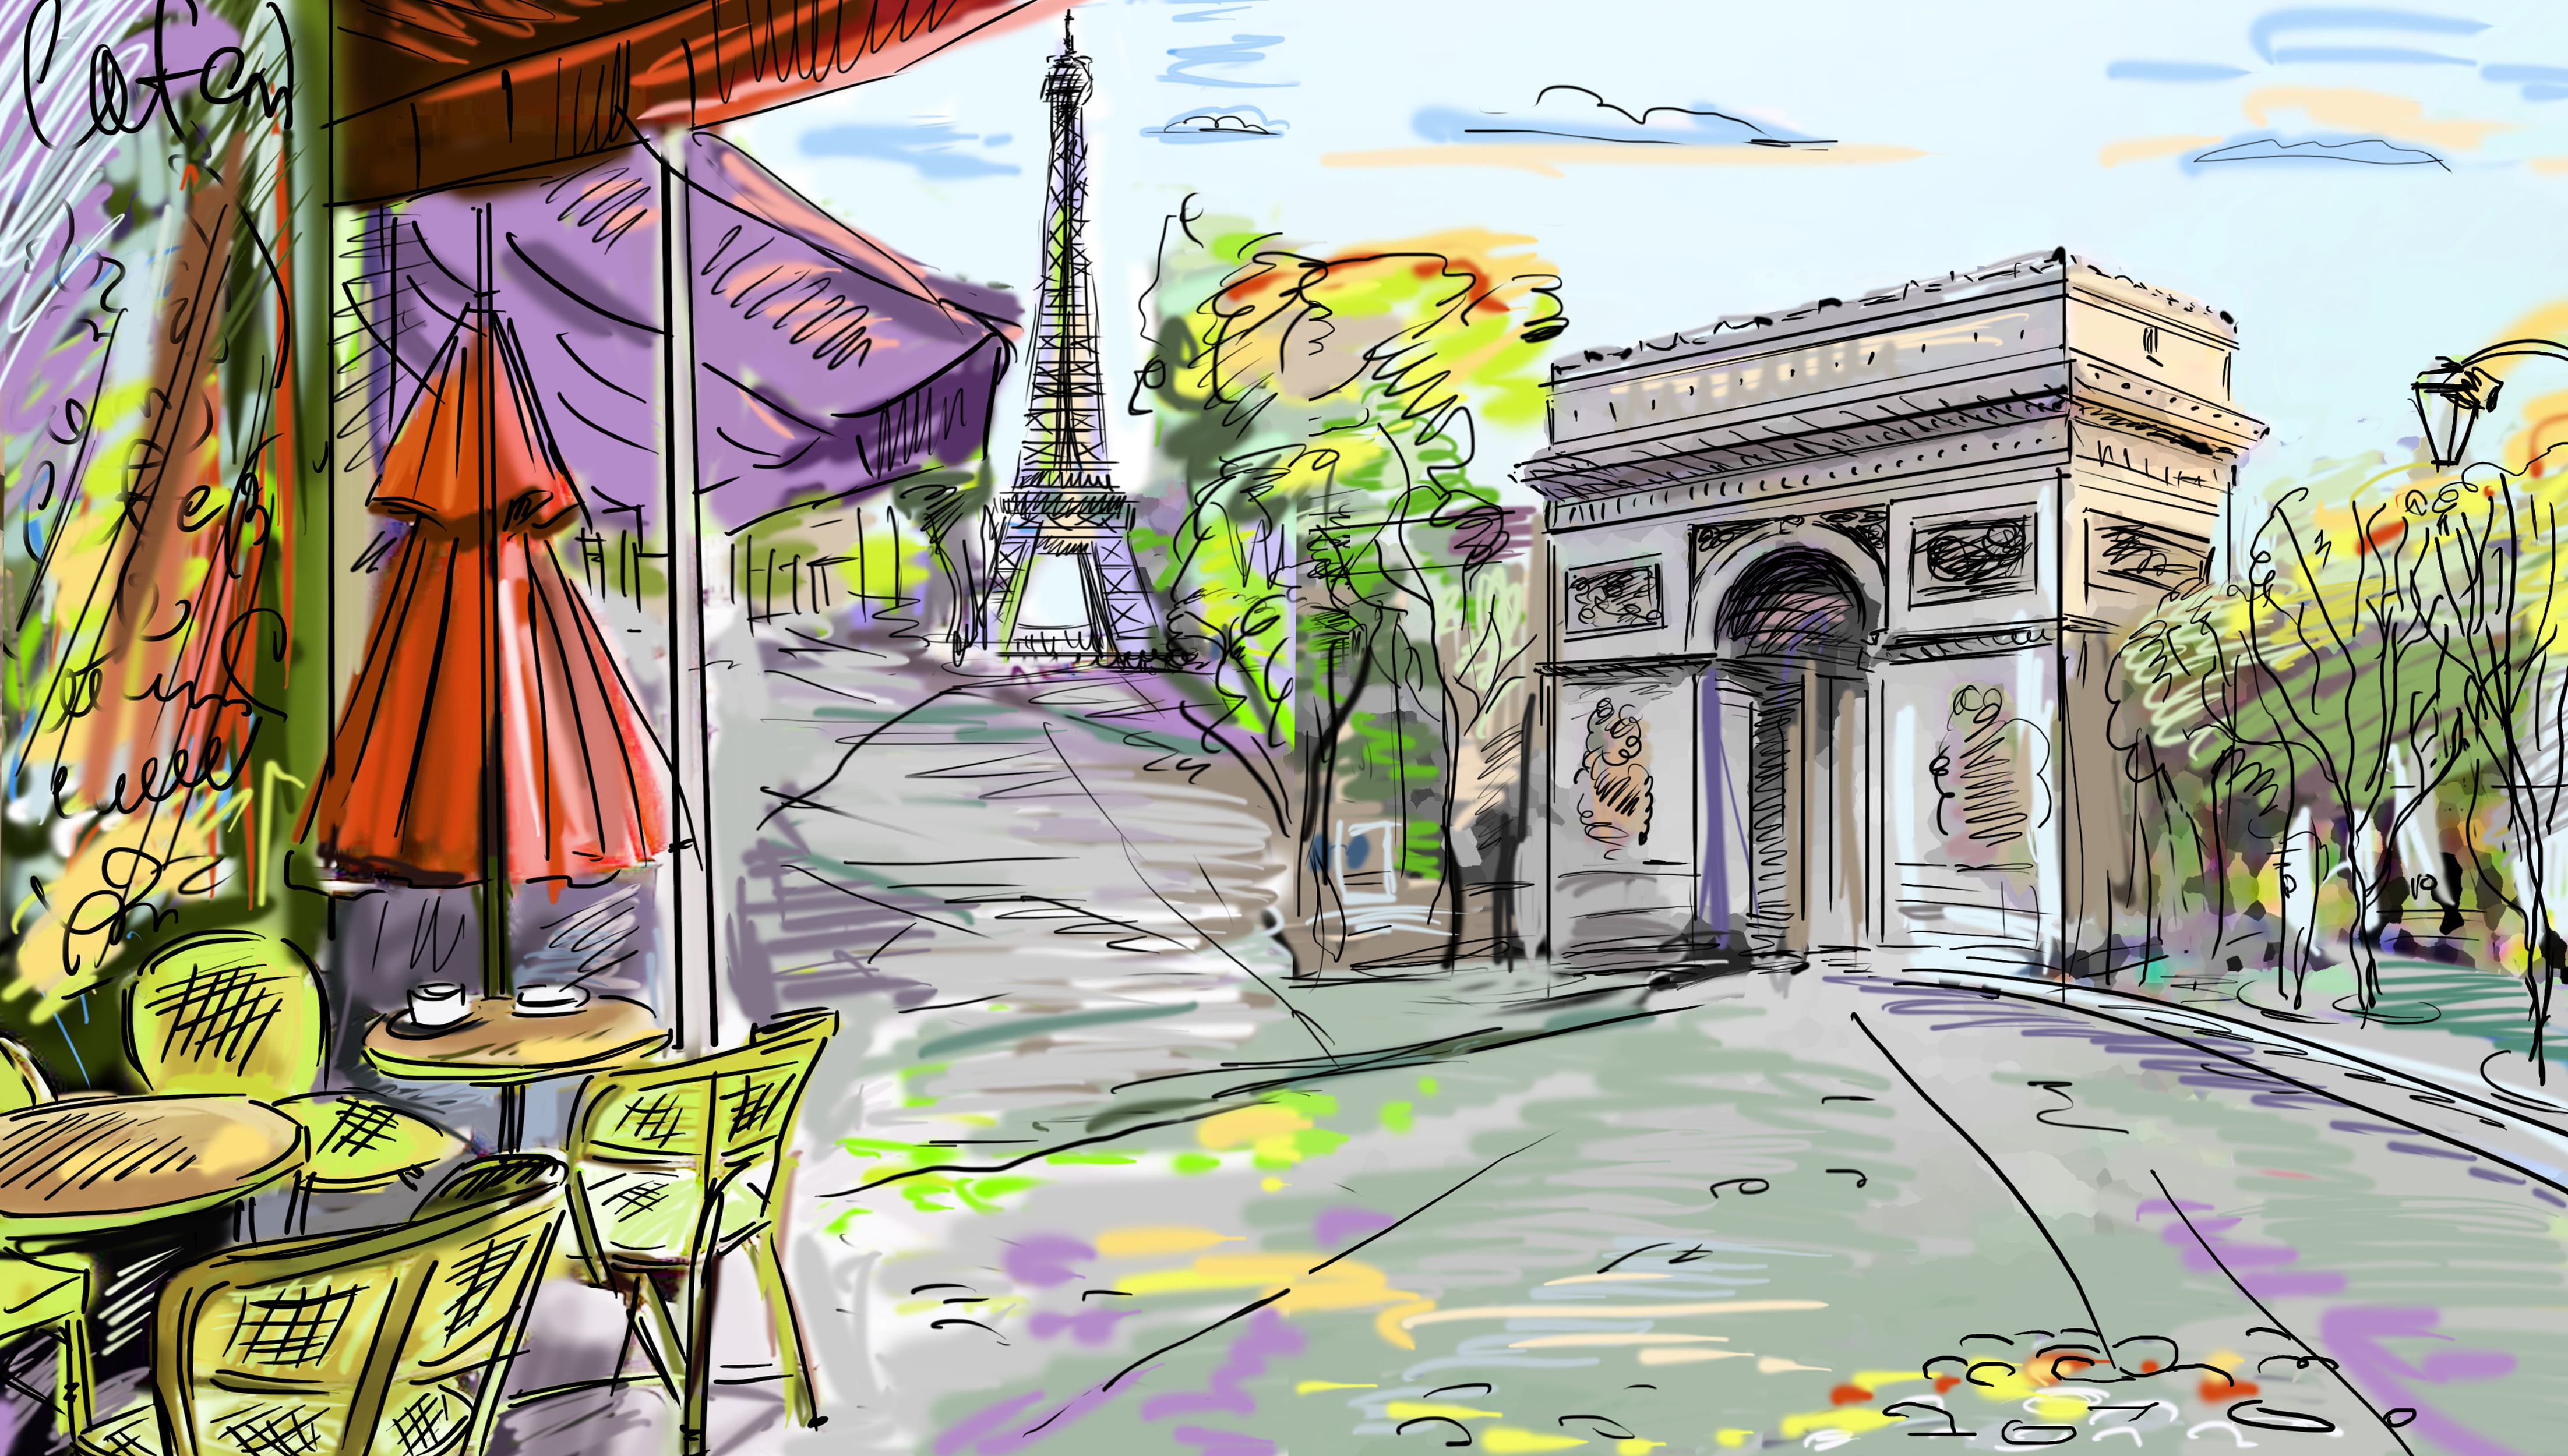 Eiffel Tower painting, trees, Paris, chairs, cafe, France, table